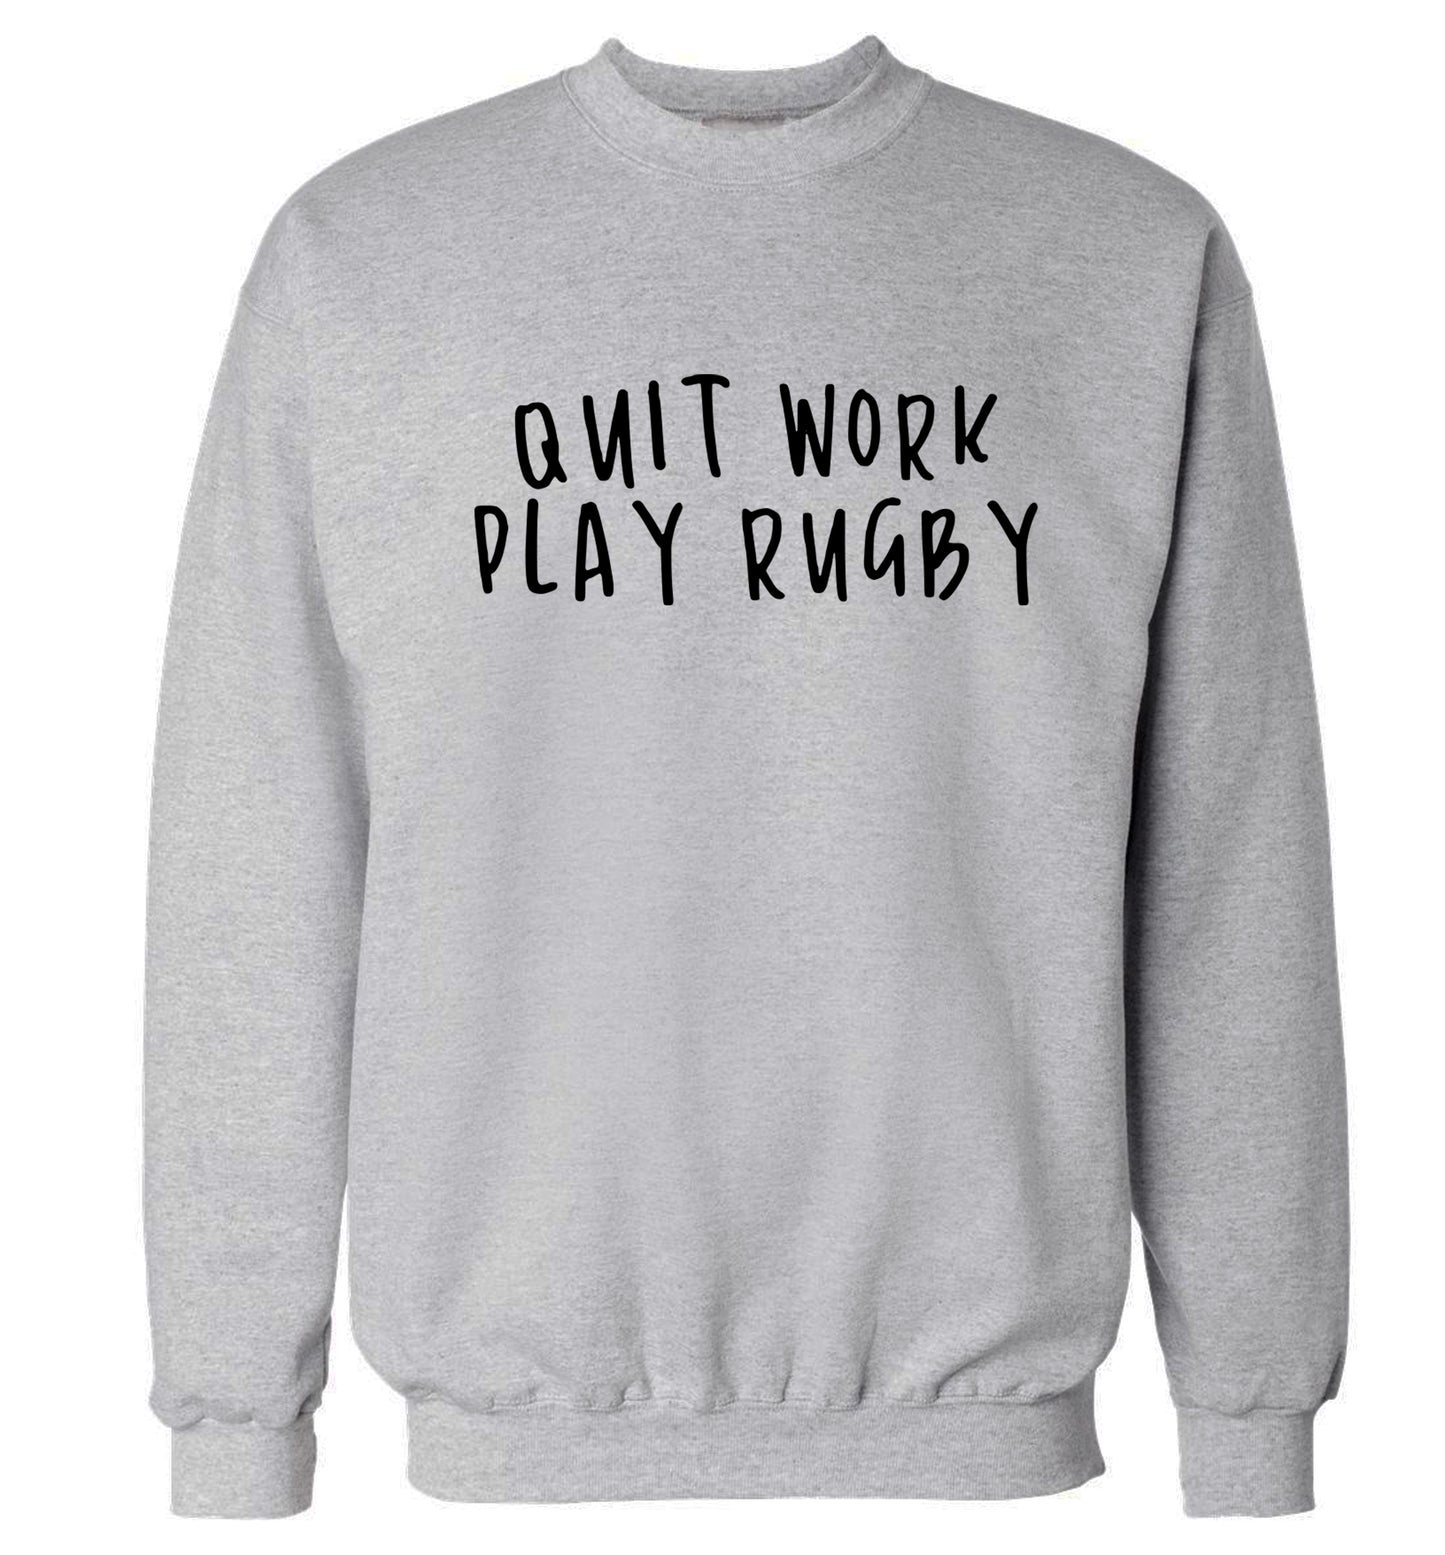 Quit work play rugby Adult's unisex grey Sweater 2XL